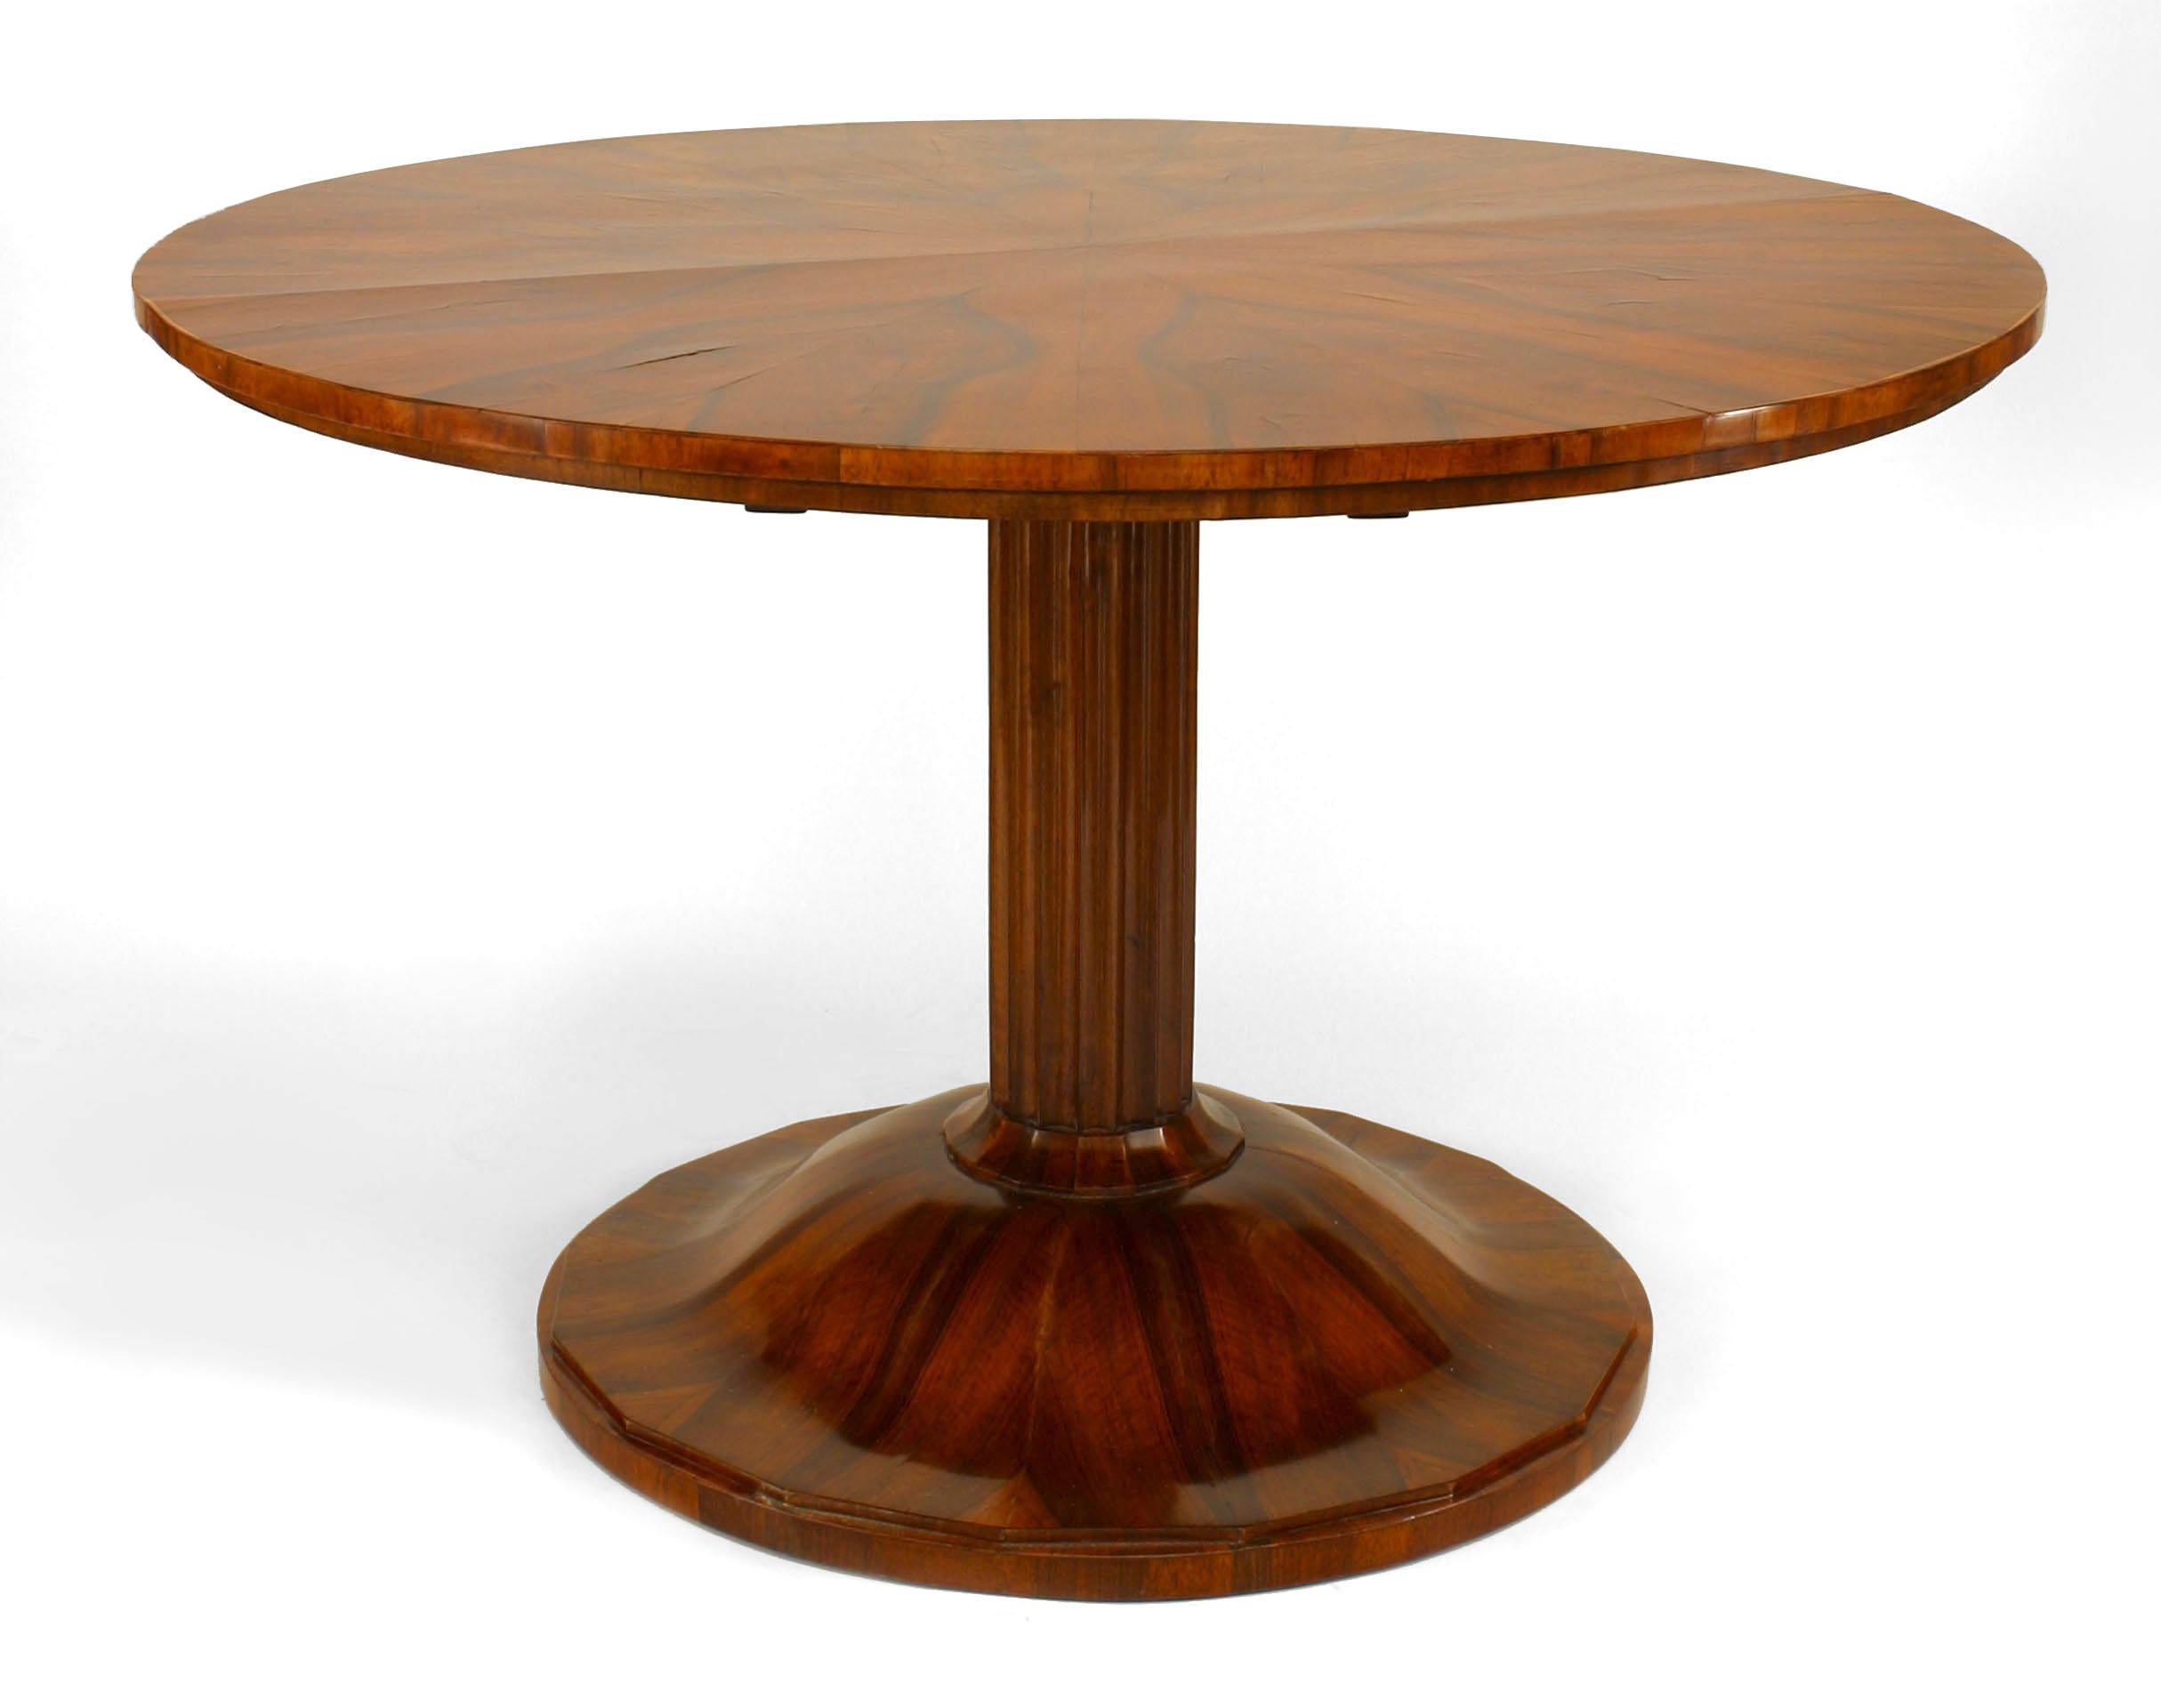 Round nineteenth century Austrian Biedermeier book matched walnut veneered center table supported by a fluted pedestal and a round, scalloped platform base.